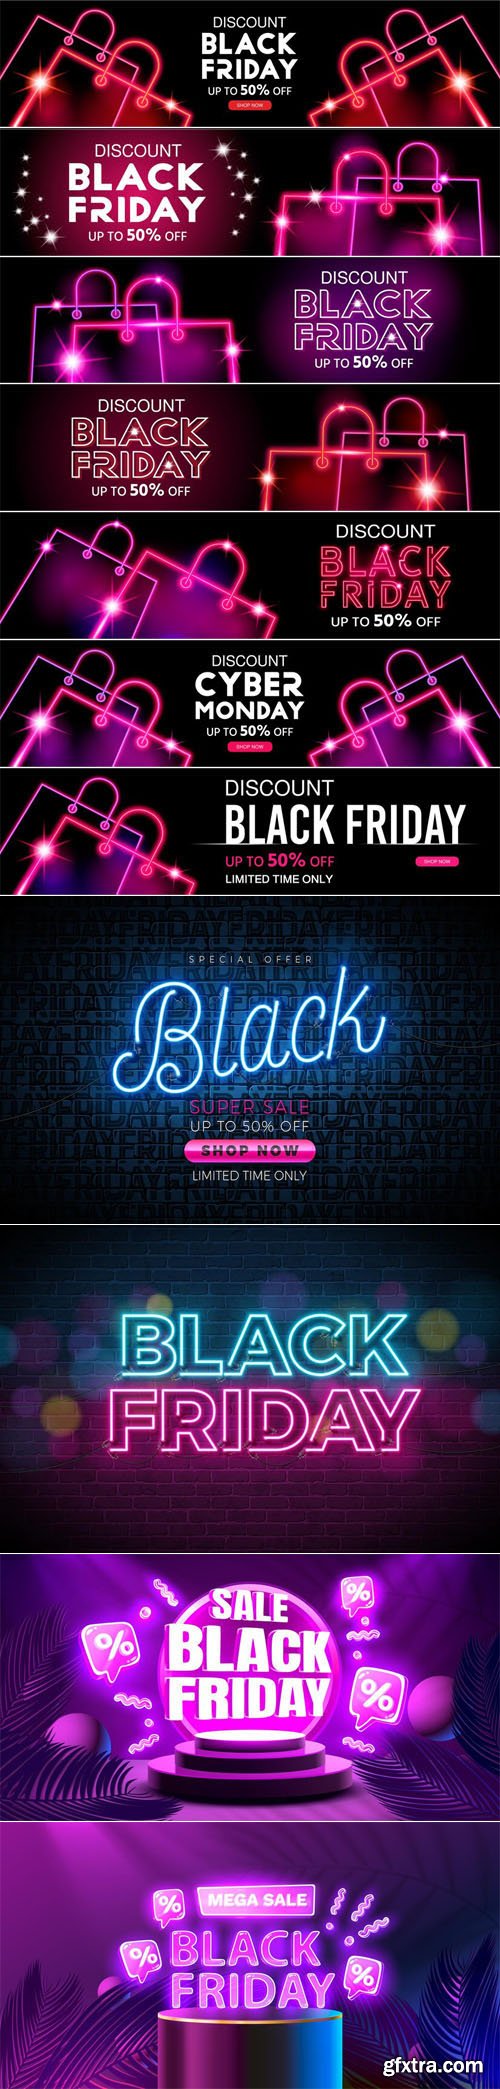 Black Friday & Cyber Monday - 11 Neon Banners Vector Templates